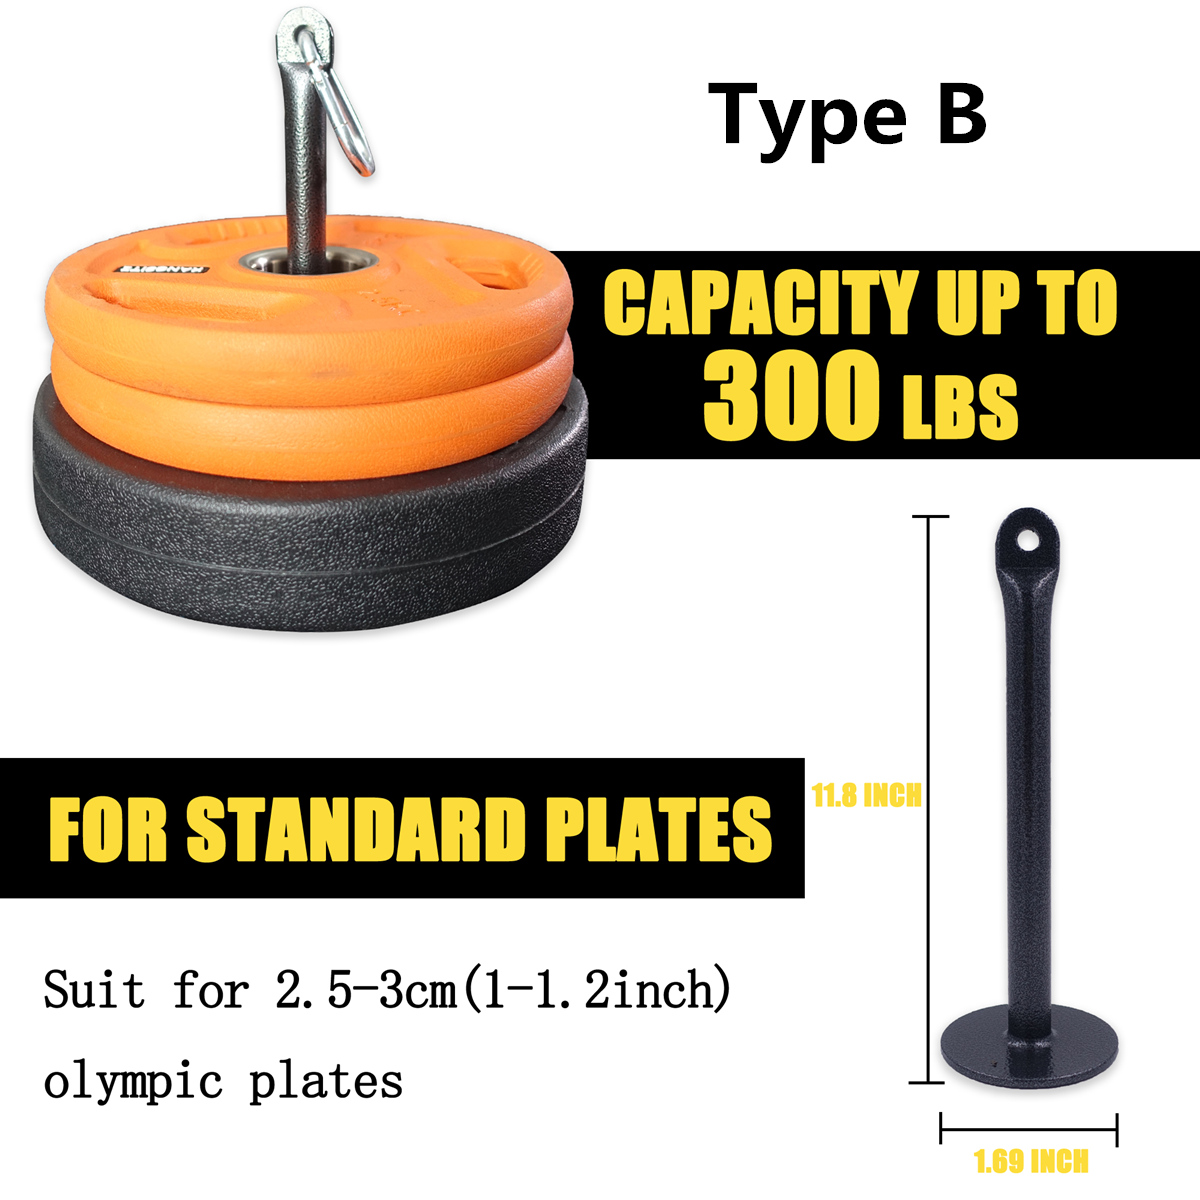 Fitness Loading Pin Gym Pulley Cable System Attachment Dumbbell Rack For Home Workout Strength Training Weight Lifting Exercises